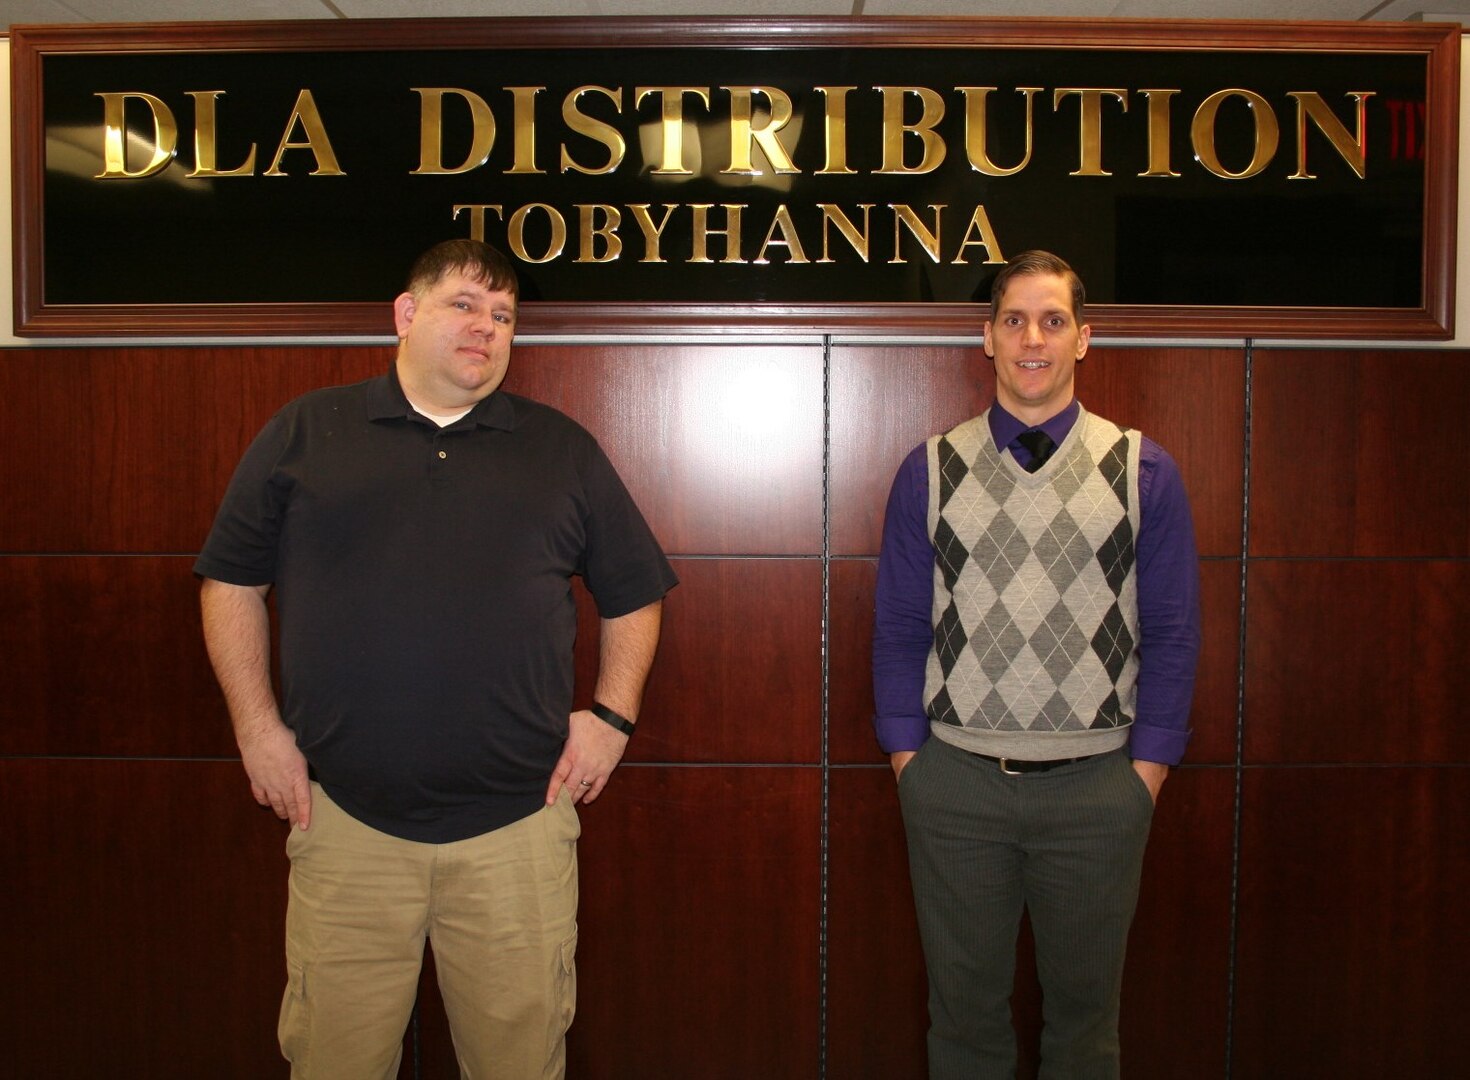 Brian Farnsworth and Michael Verton, quality assurance evaluators at Defense Logistics Agency Distribution Tobyhanna, Pa., have received the Global Distribution Excellence: Quarterly Contract Quality Assurance Program Commendable Service award.